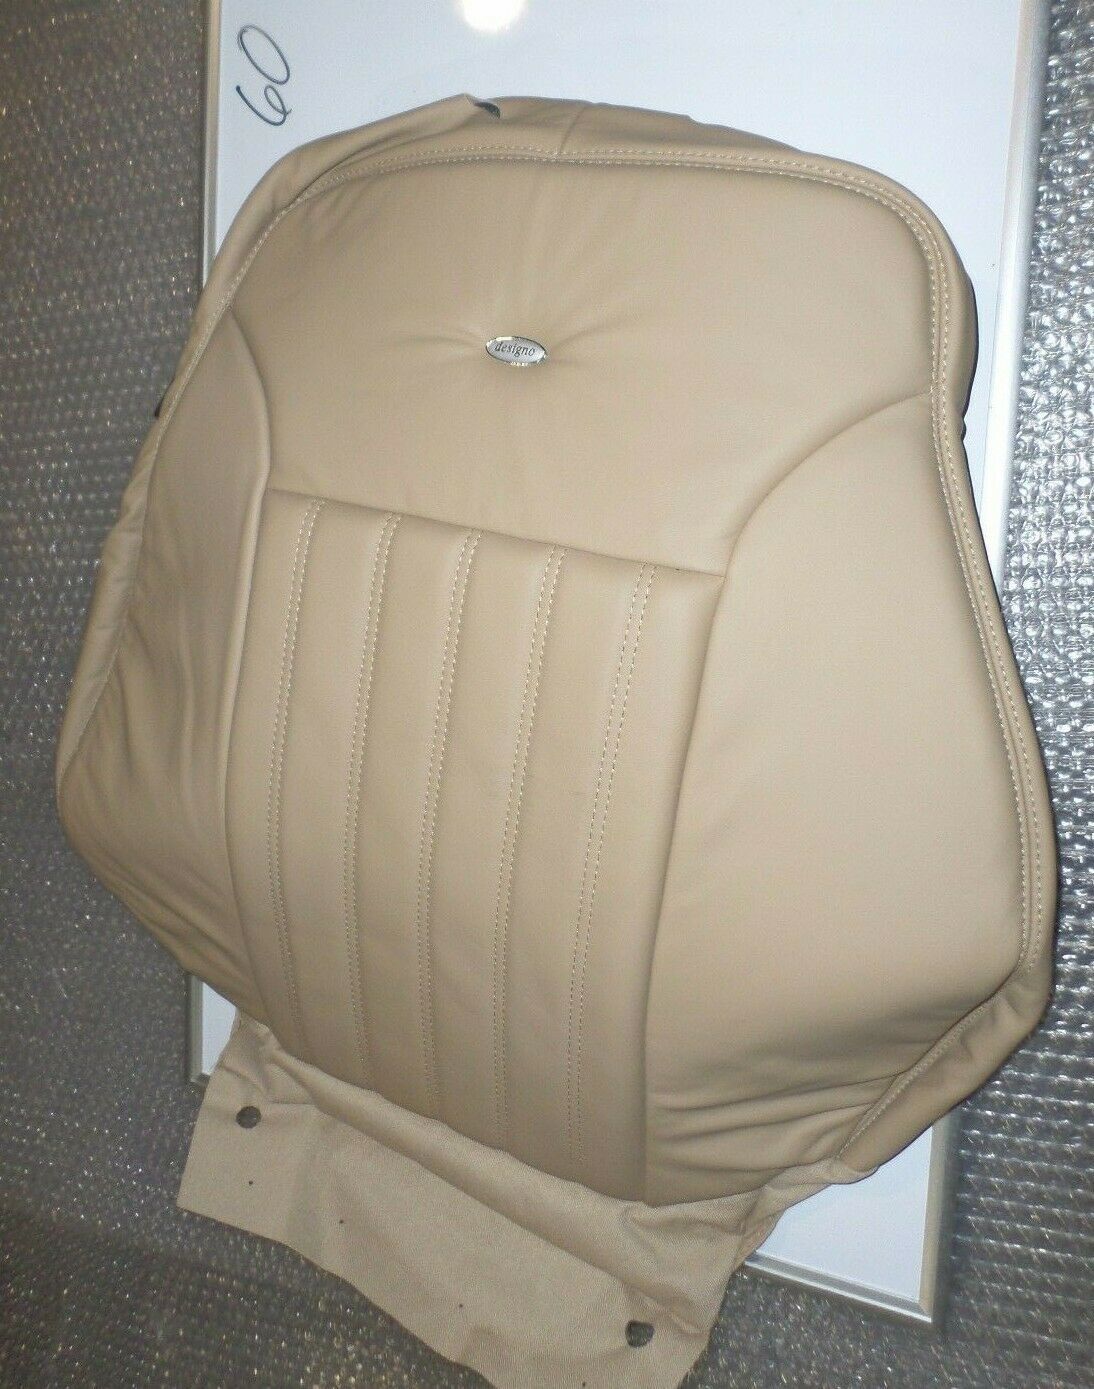 Primary image for New OEM Leather Seat Cover Mercedes ML-CLASS 2006-2013 Front Upper Tan Designo